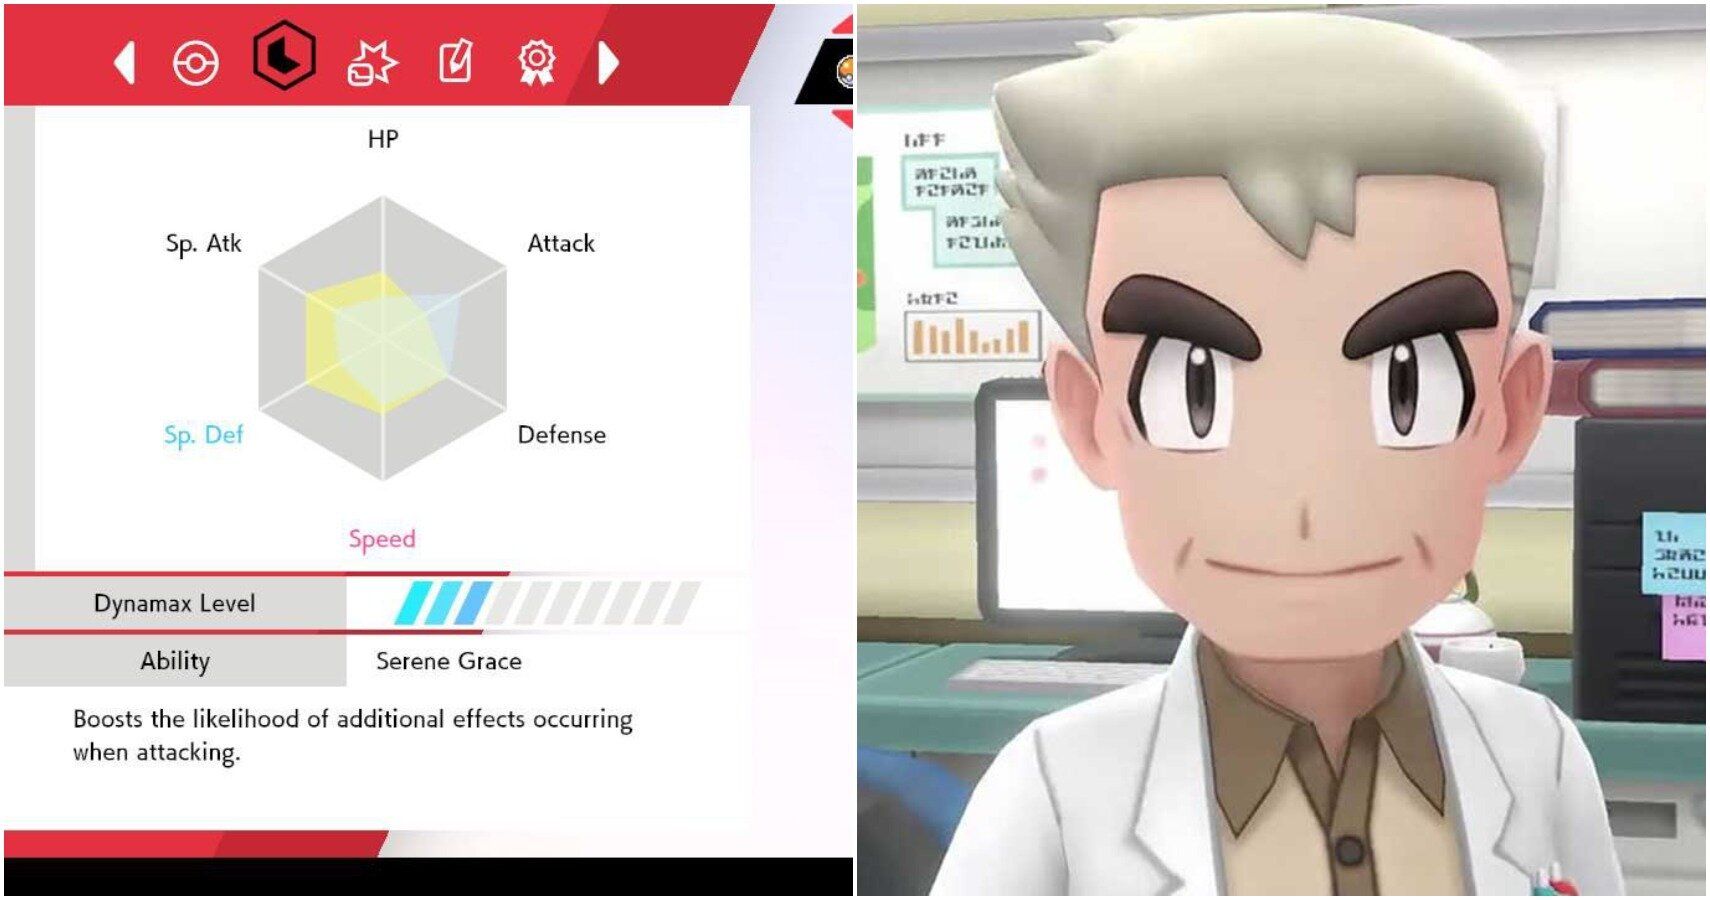 EVs, IVs, and Natures in Pokemon! what do they mean?! and how can